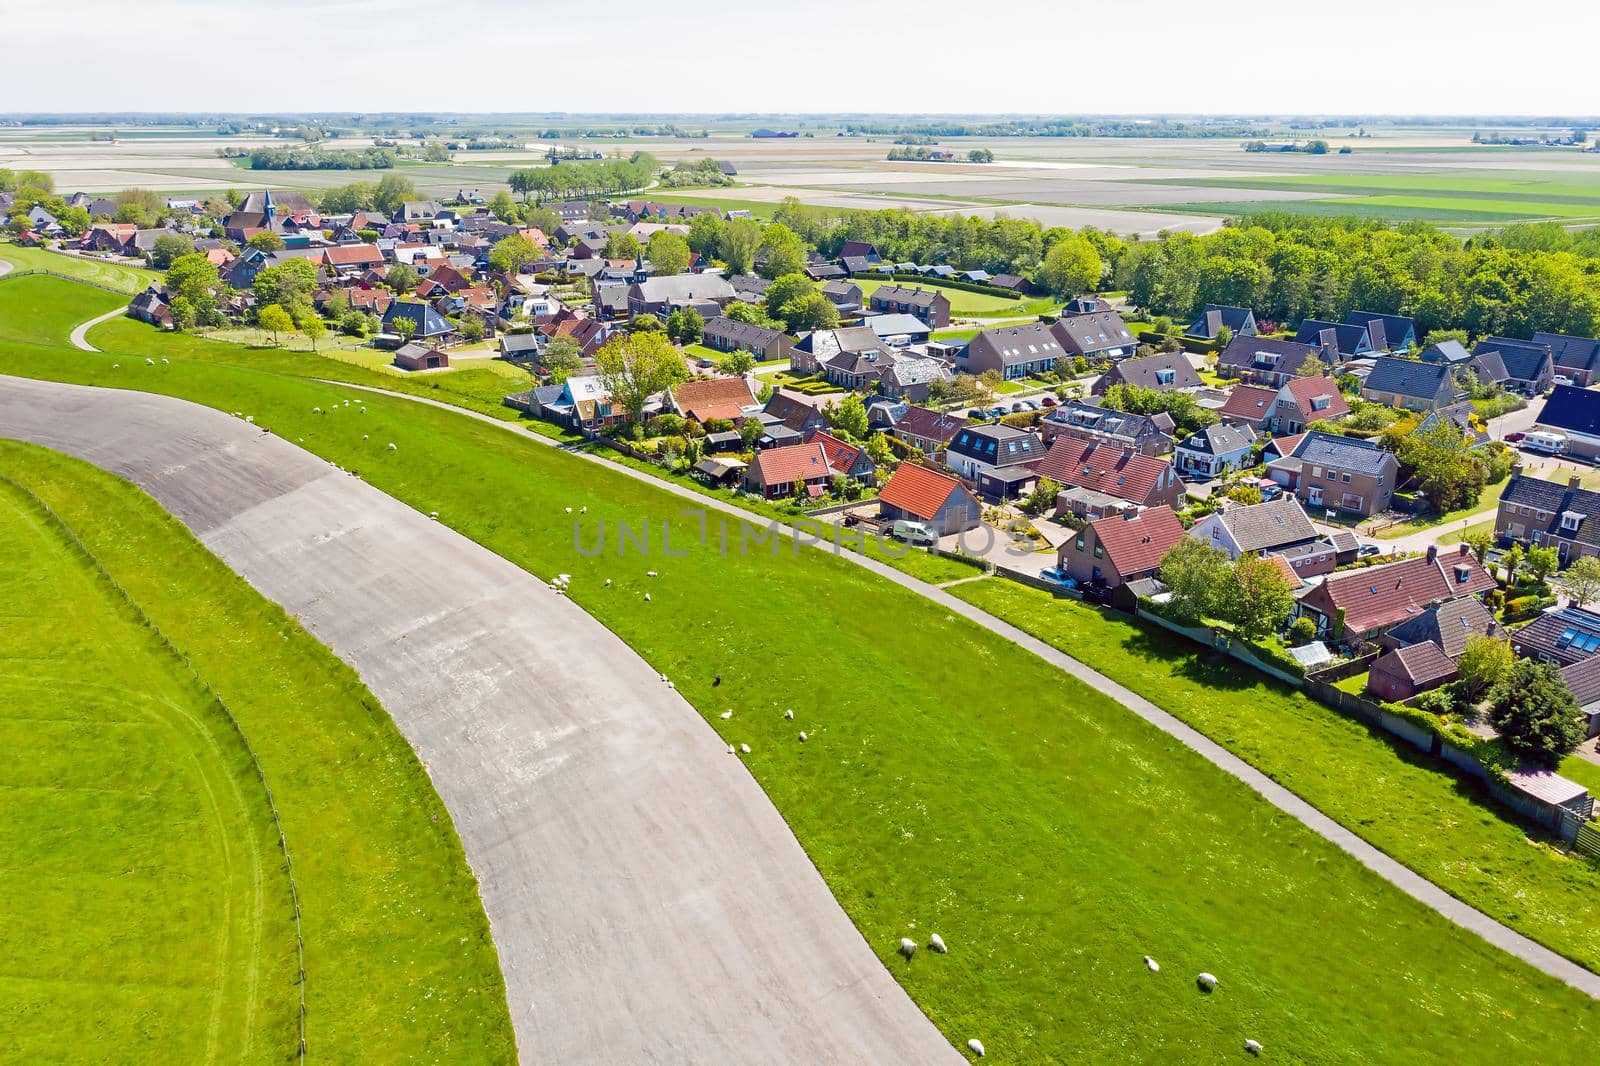 Aerial from the village Moddergat at the Wadden Sea in Friesland the Netherlands by devy